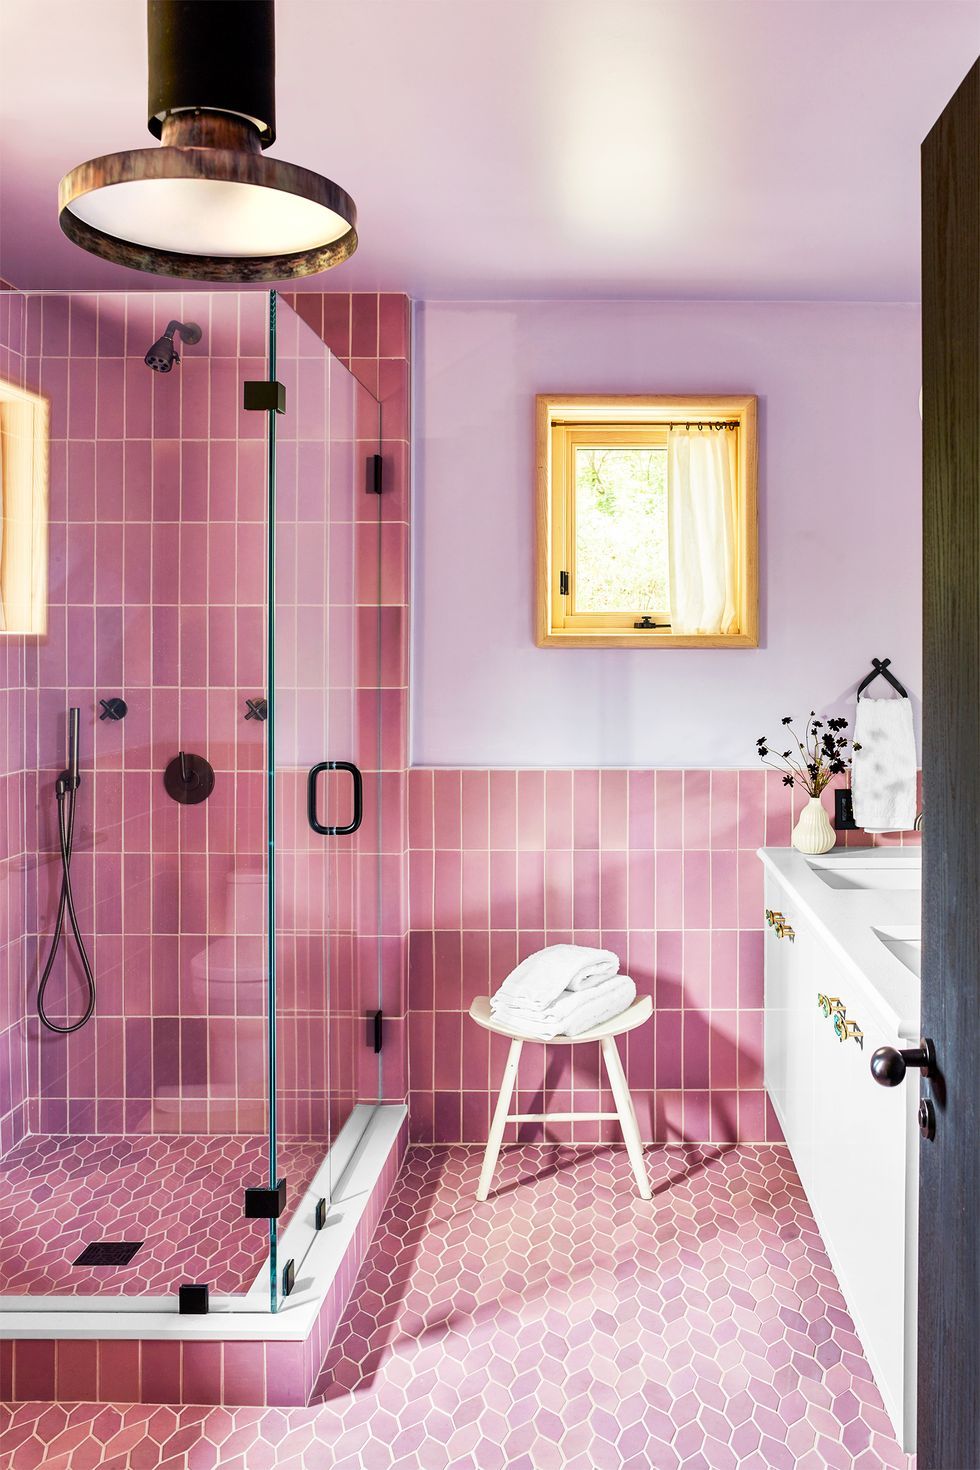 Tips to make small bathrooms more open and spacious - Photo 2.